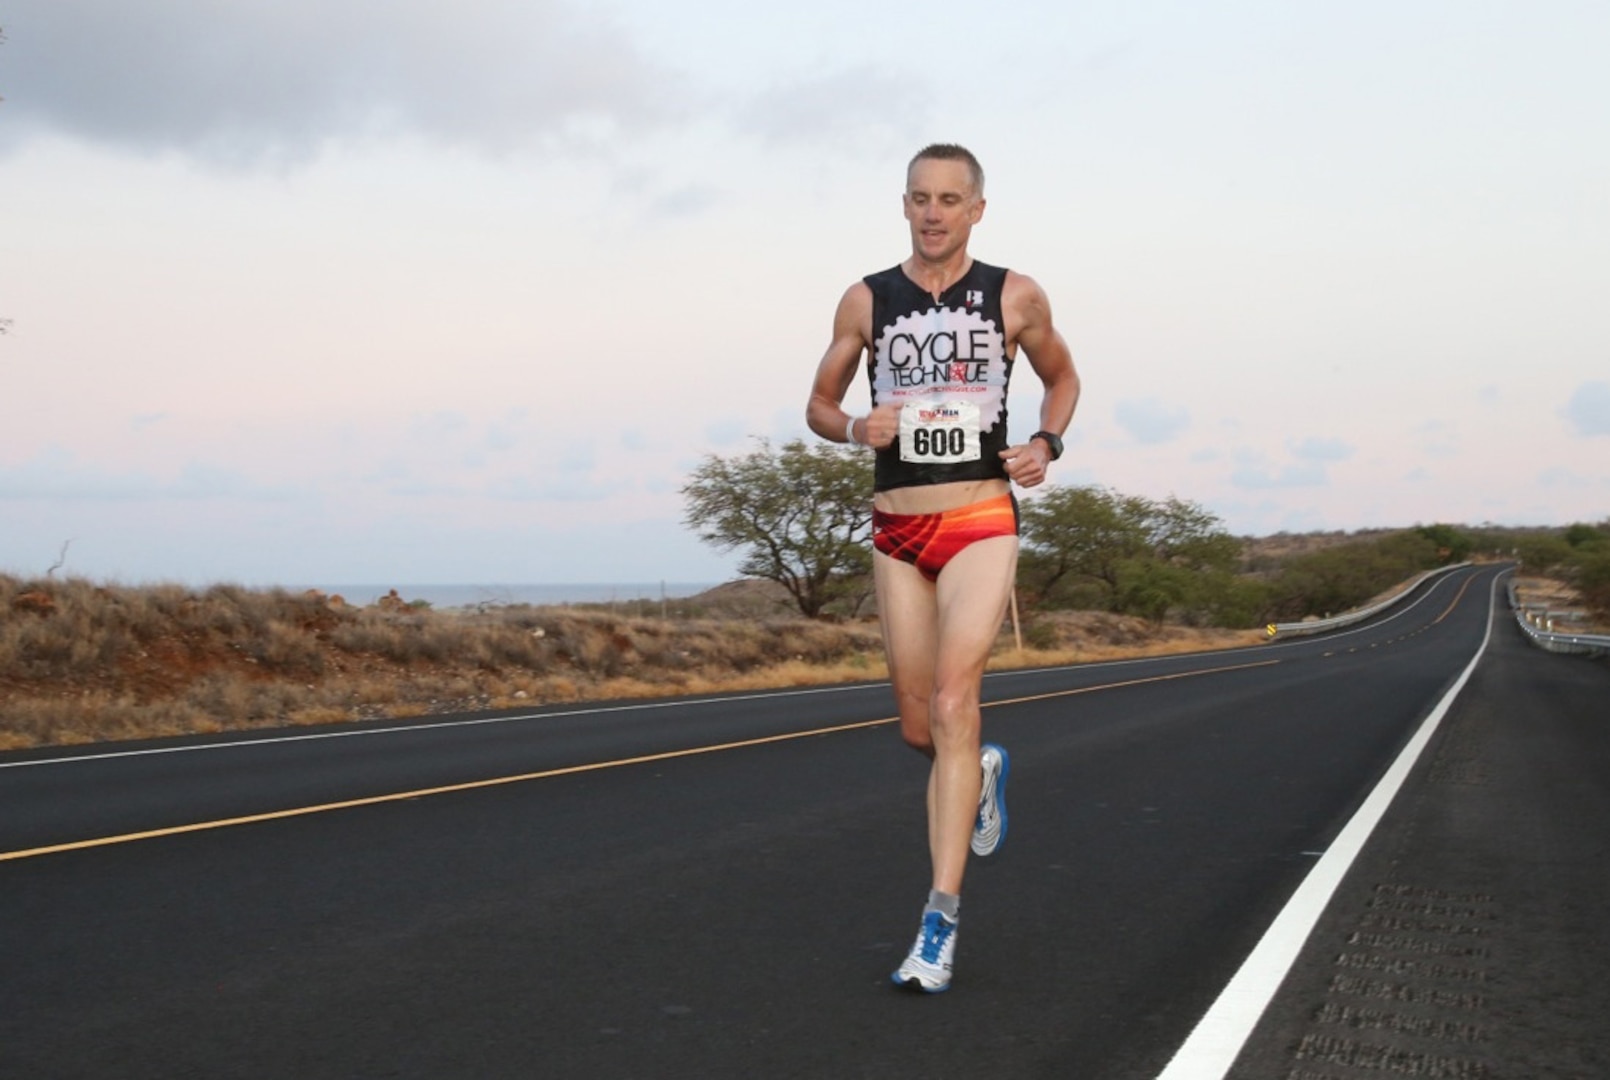 HAWAII – After an amazing recovery from serious leg injuries suffered during a bicycle accident 14 months earlier, Lieutenant-Colonel Tony O’Keeffe runs a double marathon during the final phase of the grueling three-day 2012 Ultraman Triathlon World Championships race from 23 to 25 November in Hawaii, finishing fourth overall. O’Keefe is a Royal Canadian Air Force officer currently serving at North American Aerospace Defense Command in Colorado Springs, Colo. 

(Photo by Rick Kent) 

